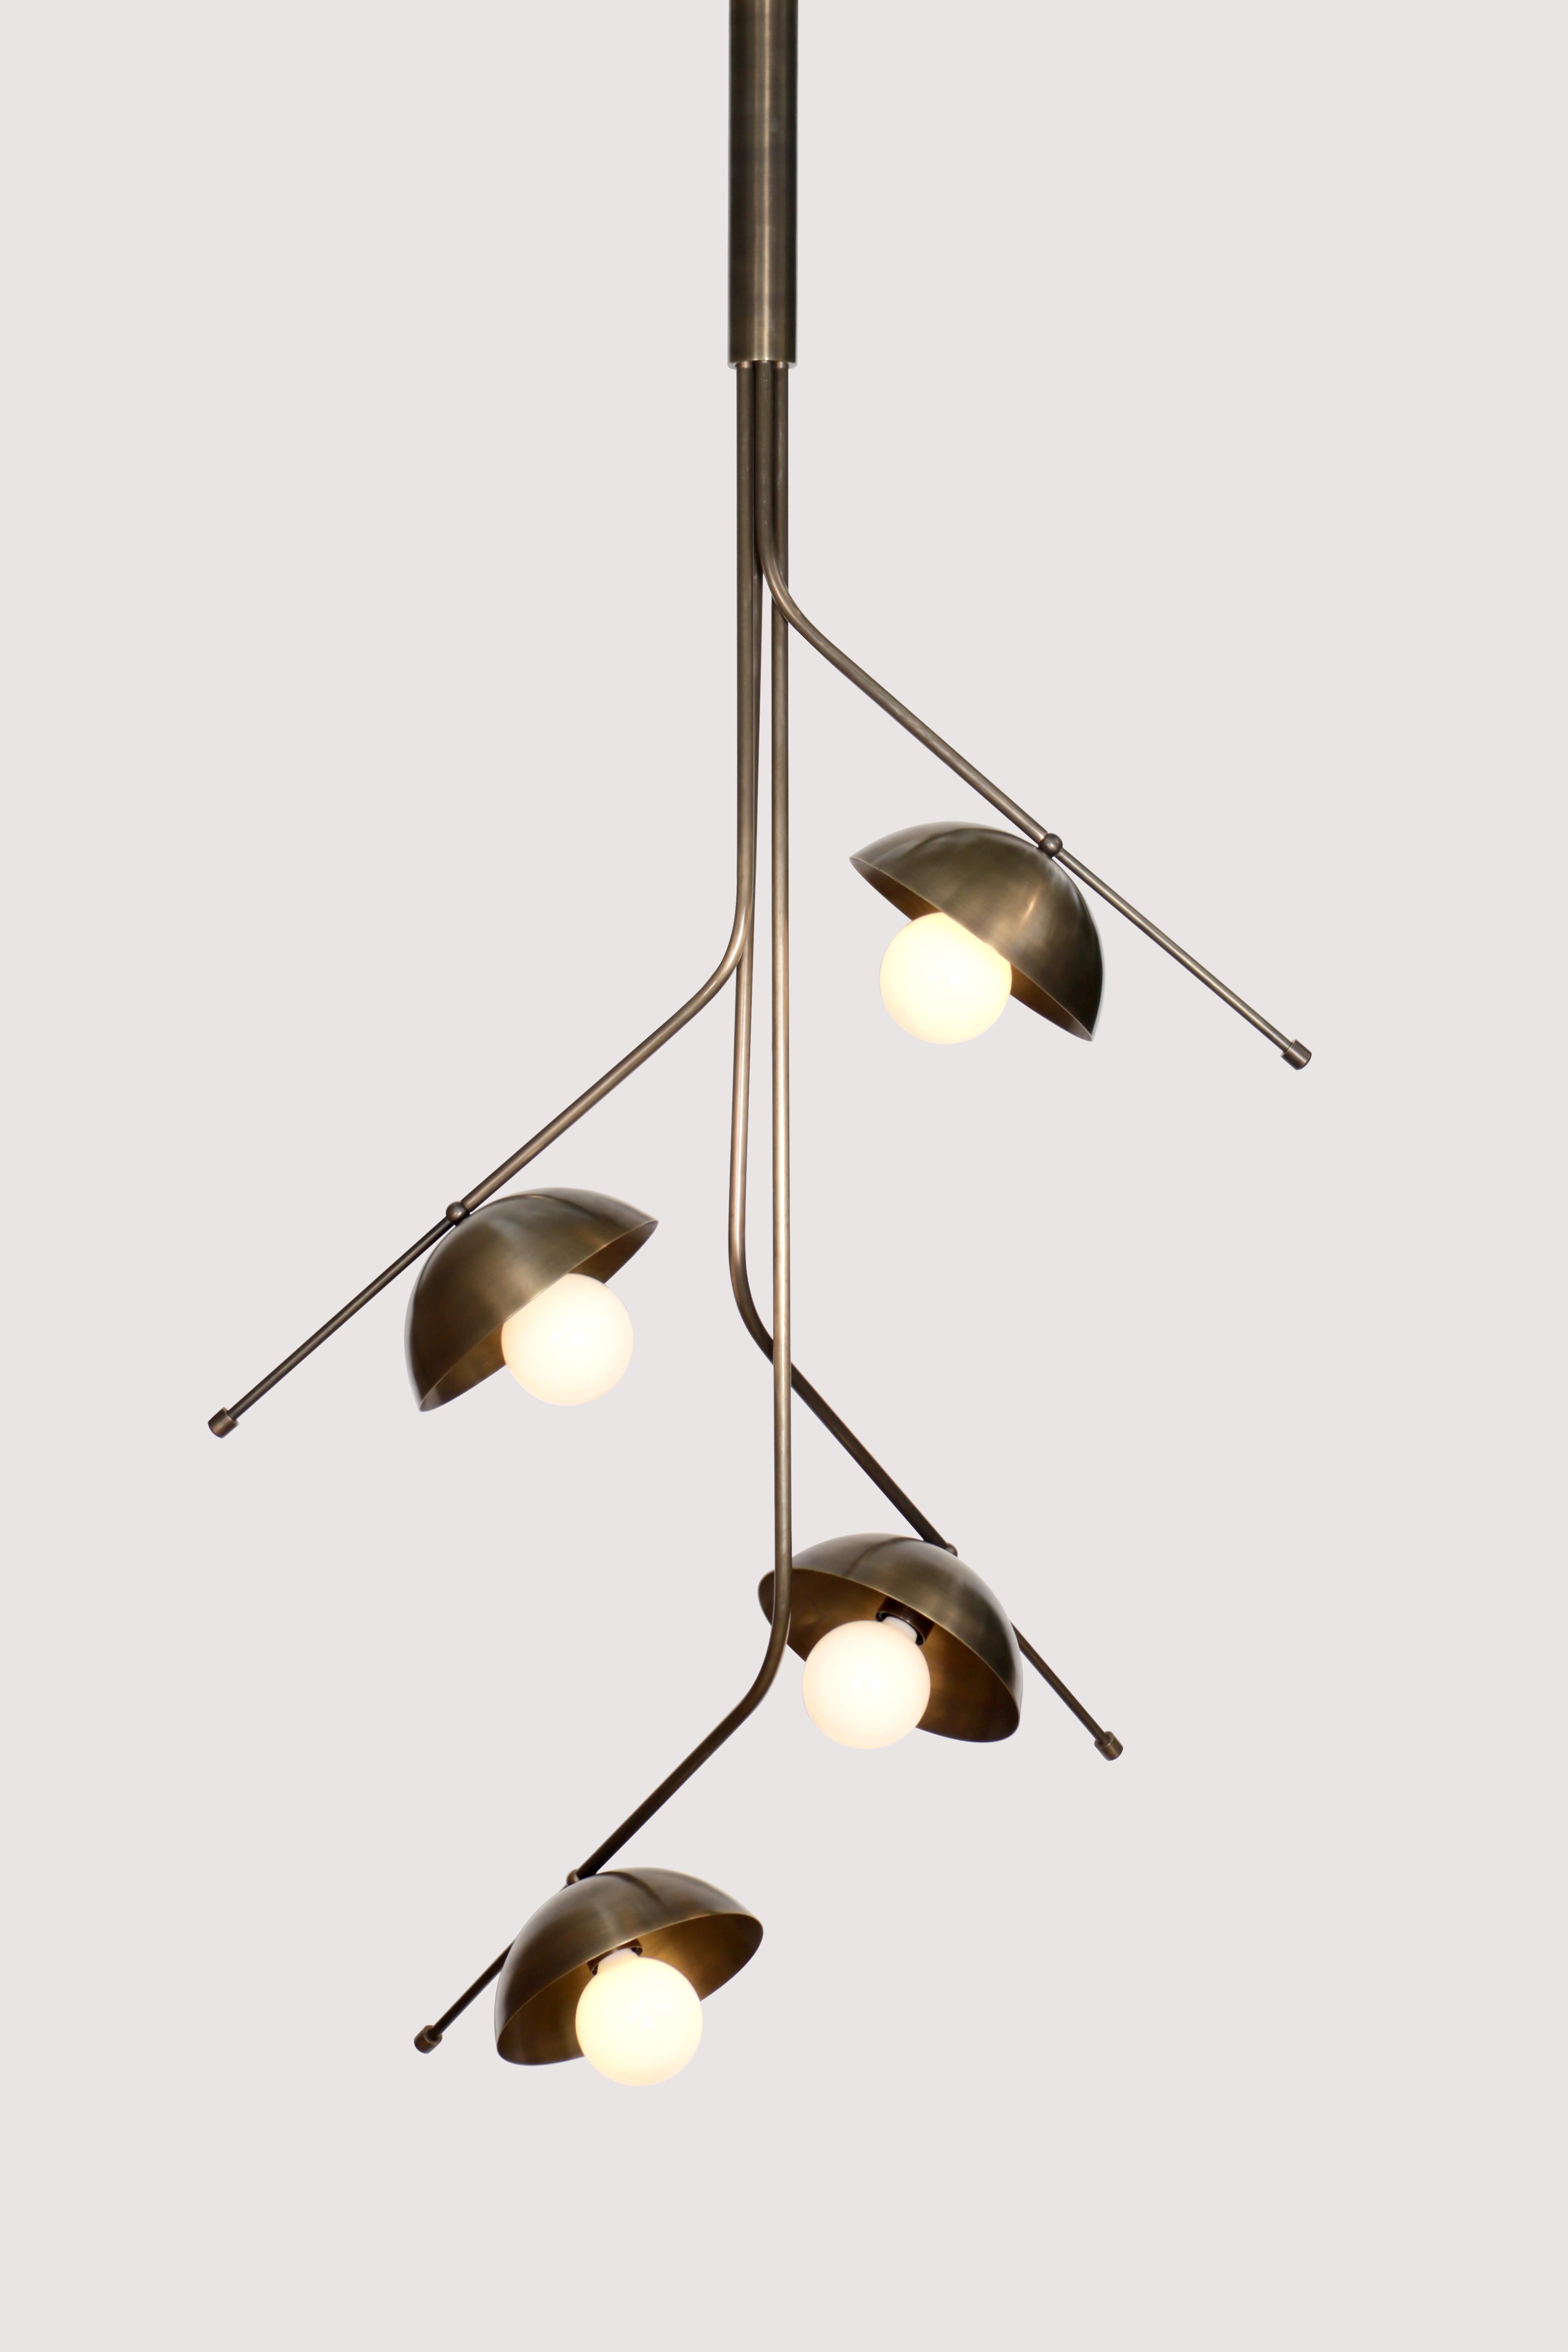 Wing 4 Brass Dome Pendant Lamp by Lamp Shaper
Dimensions: D 84 x W 84 x H 165 cm.
Materials: Brass.

Different finishes available: raw brass, aged brass, burnt brass and brushed brass Please contact us.

All our lamps can be wired according to each